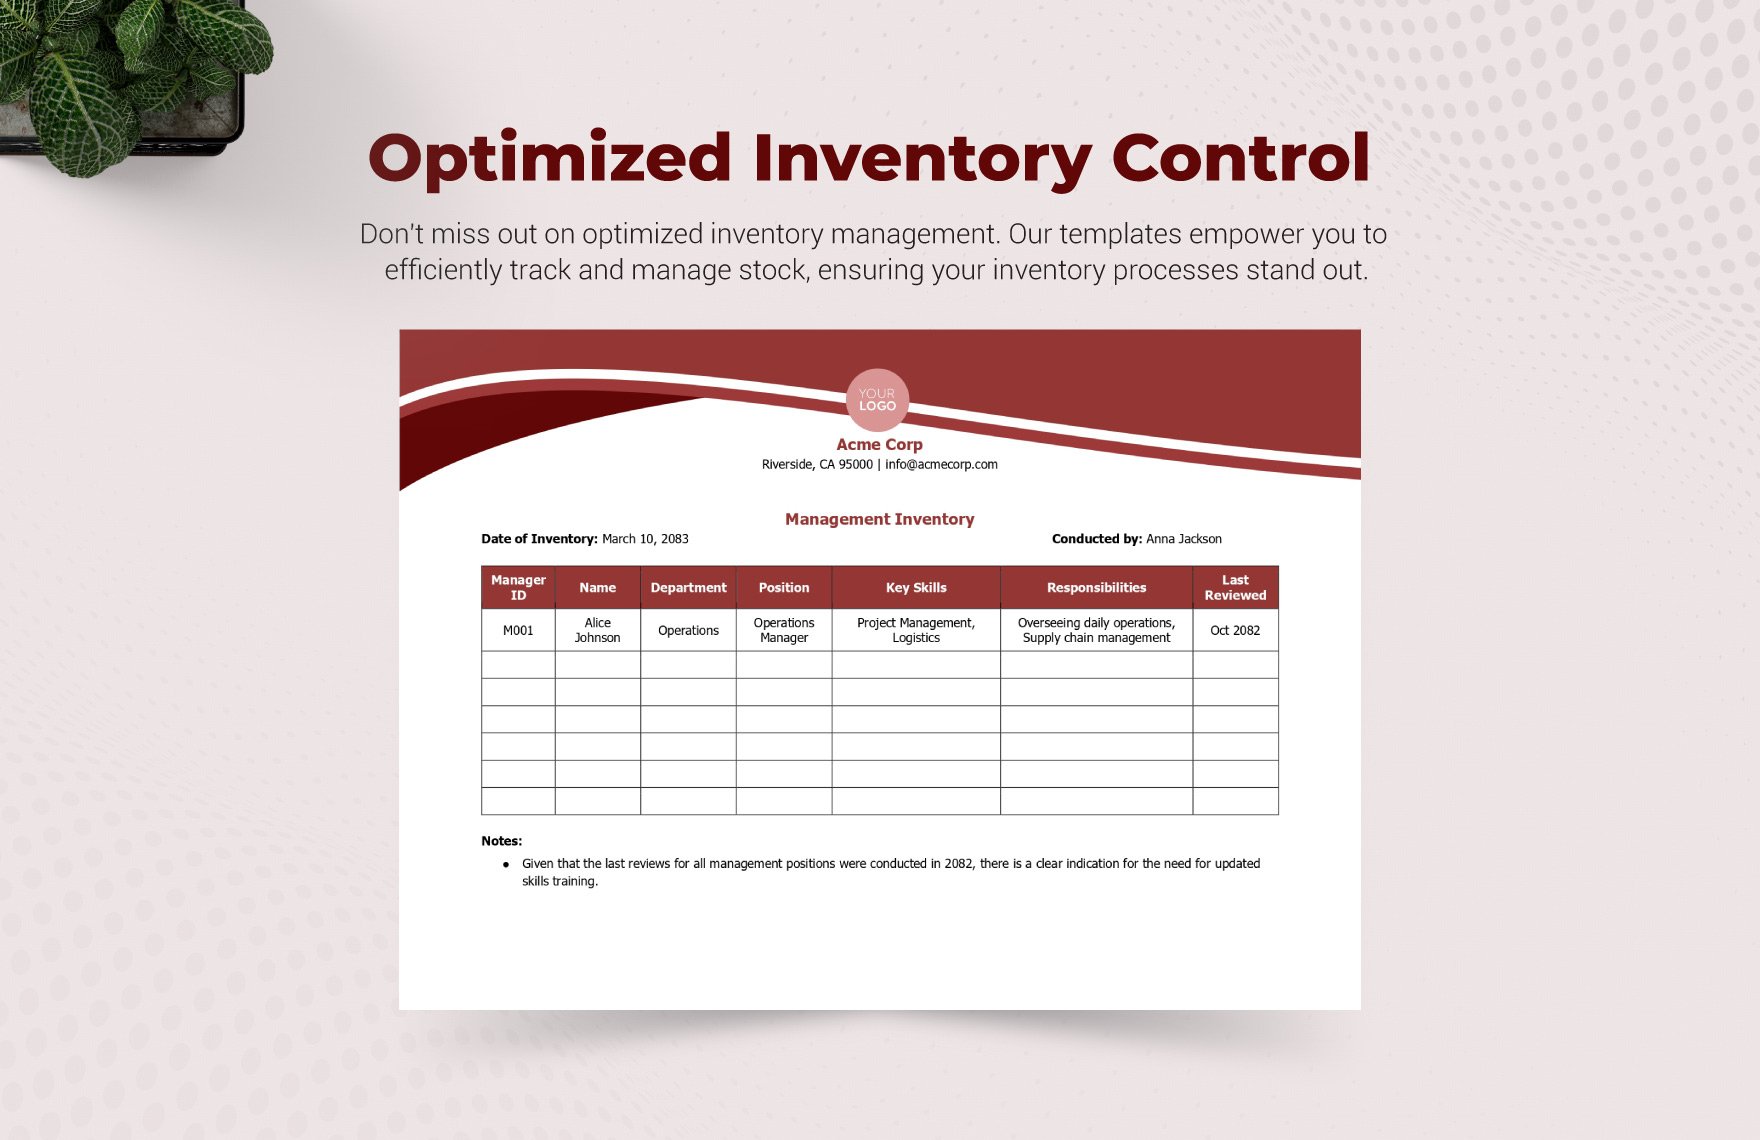 Management Inventory Template